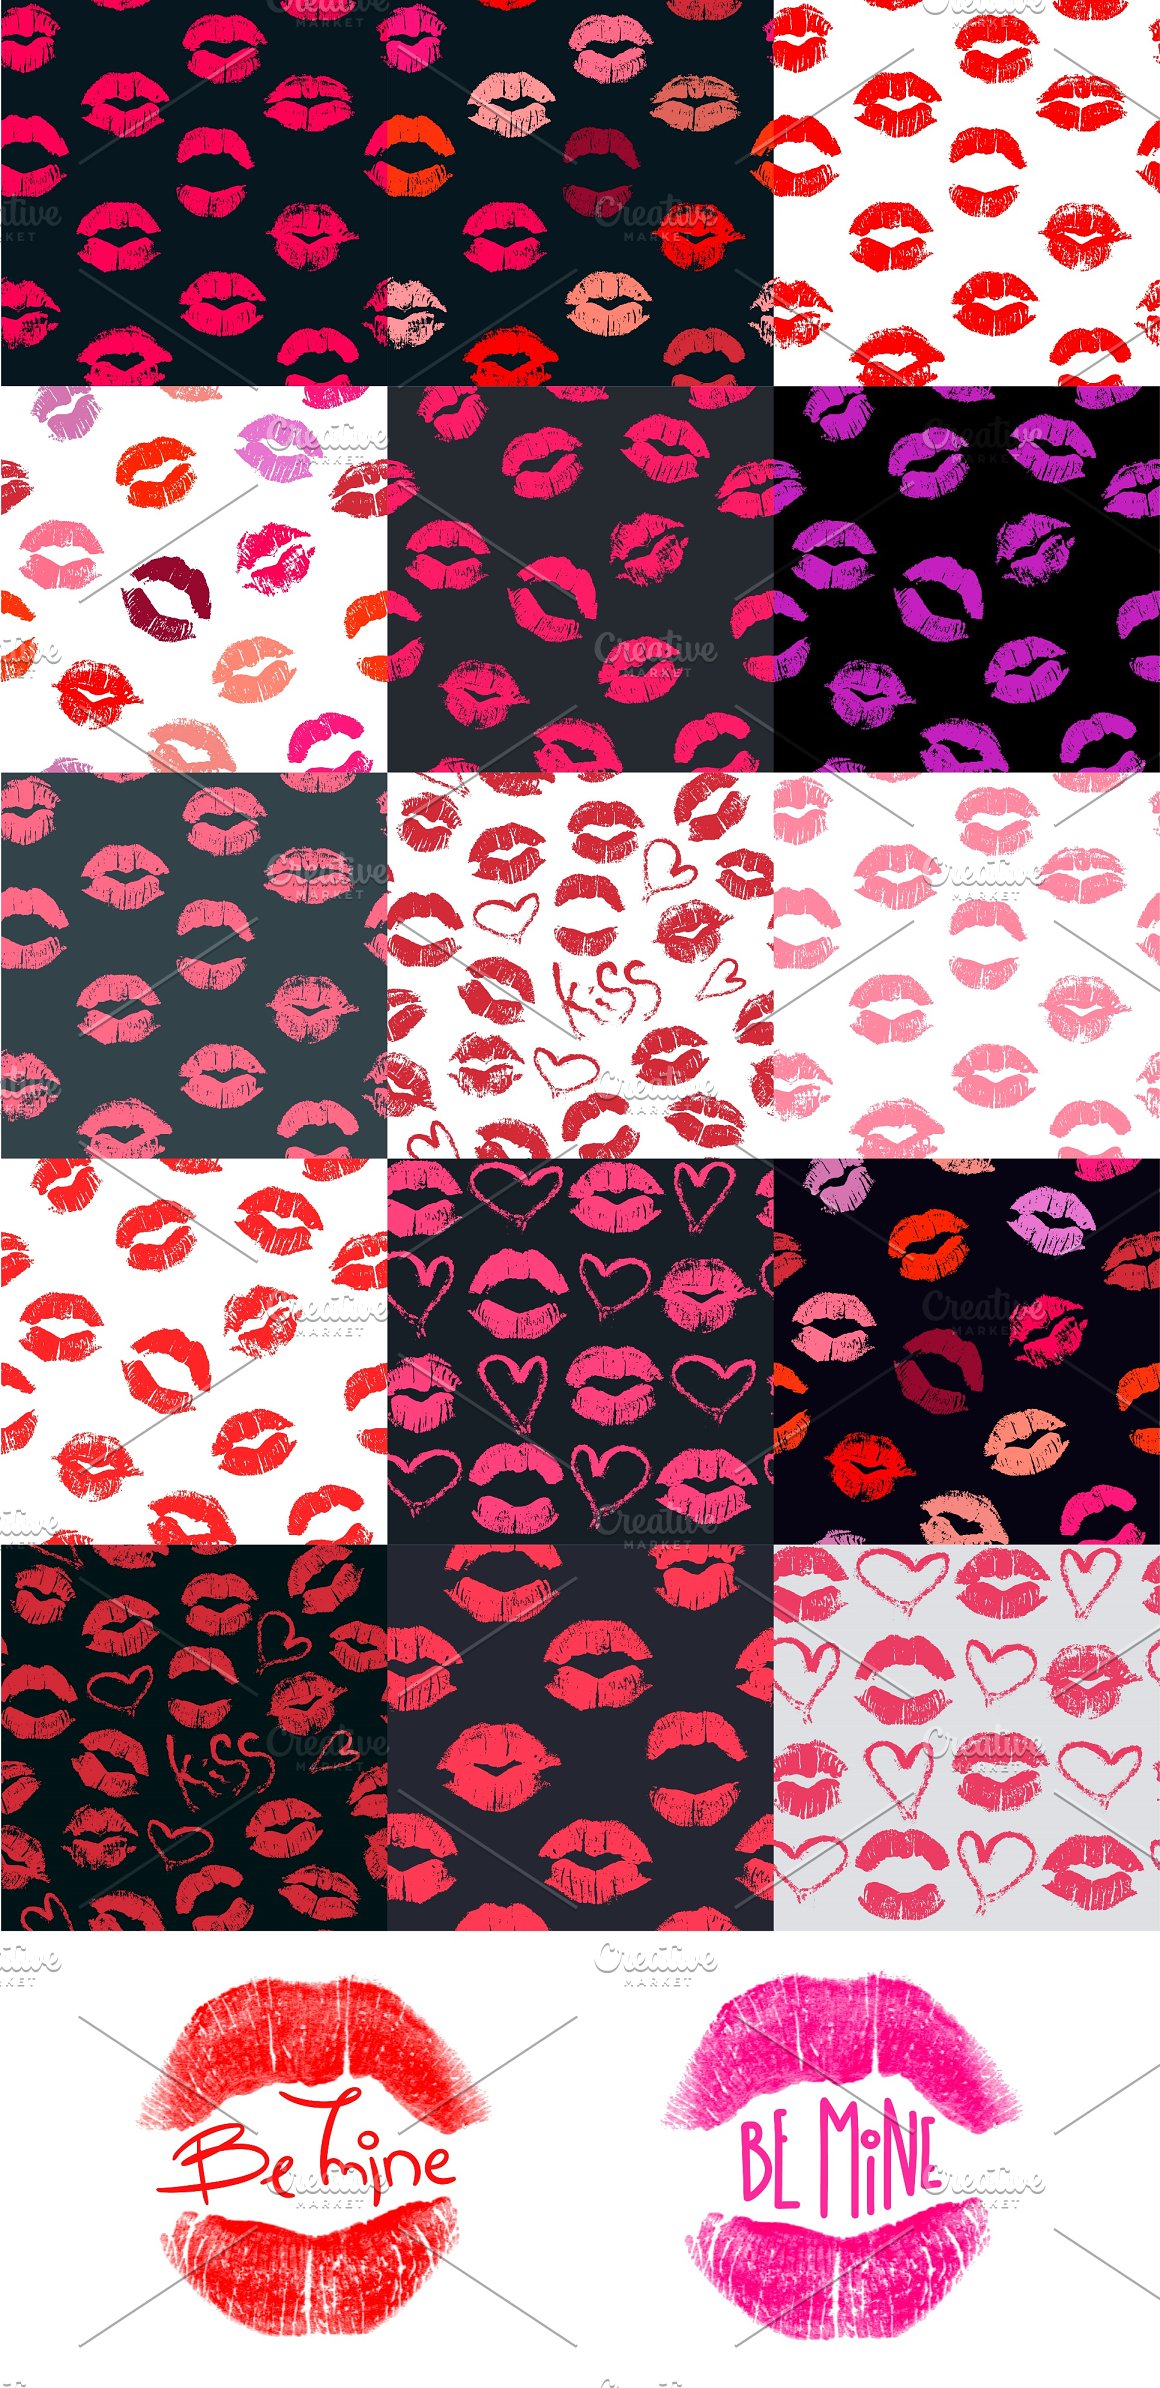 15 different lipstick kisses patterns and red and pink illustrations.